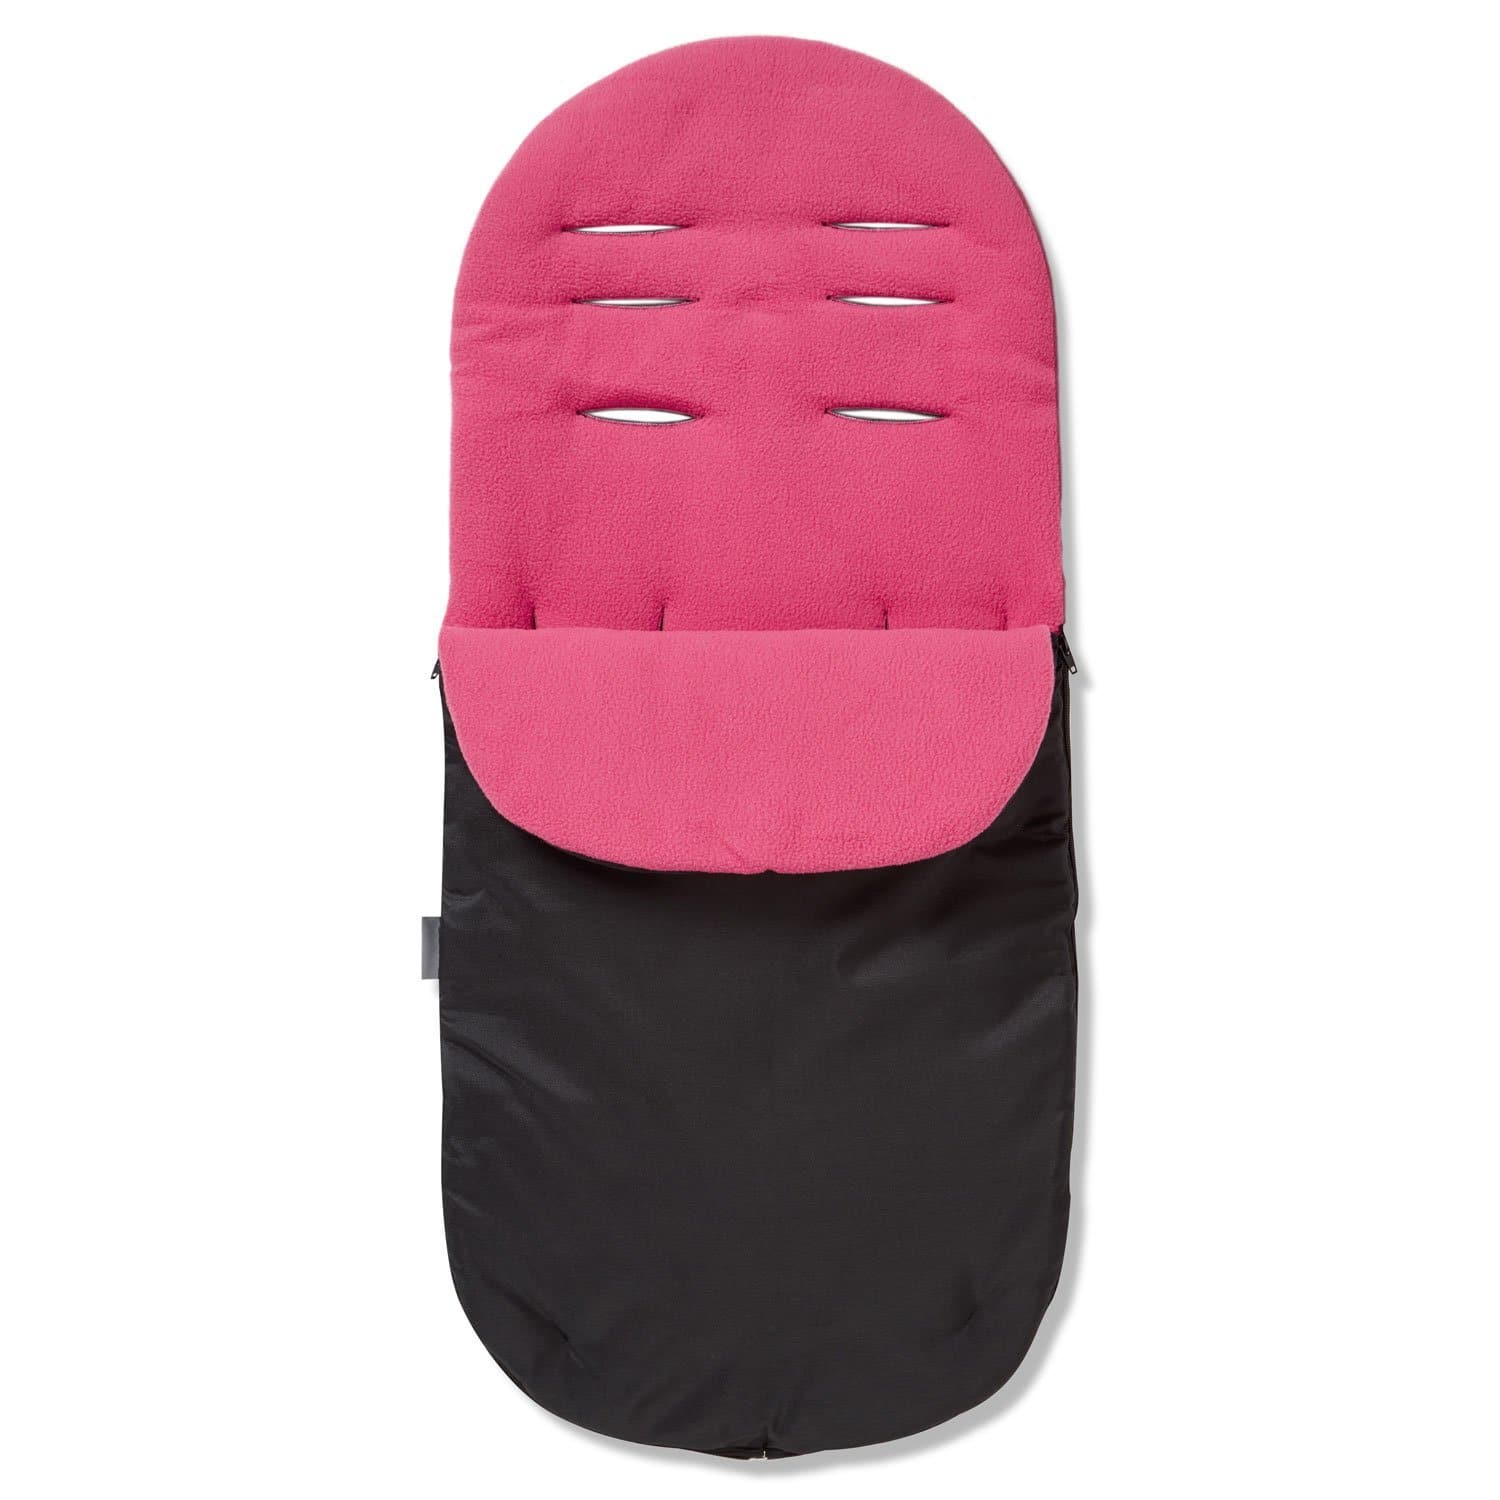 Footmuff / Cosy Toes Compatible with Nania - For Your Little One